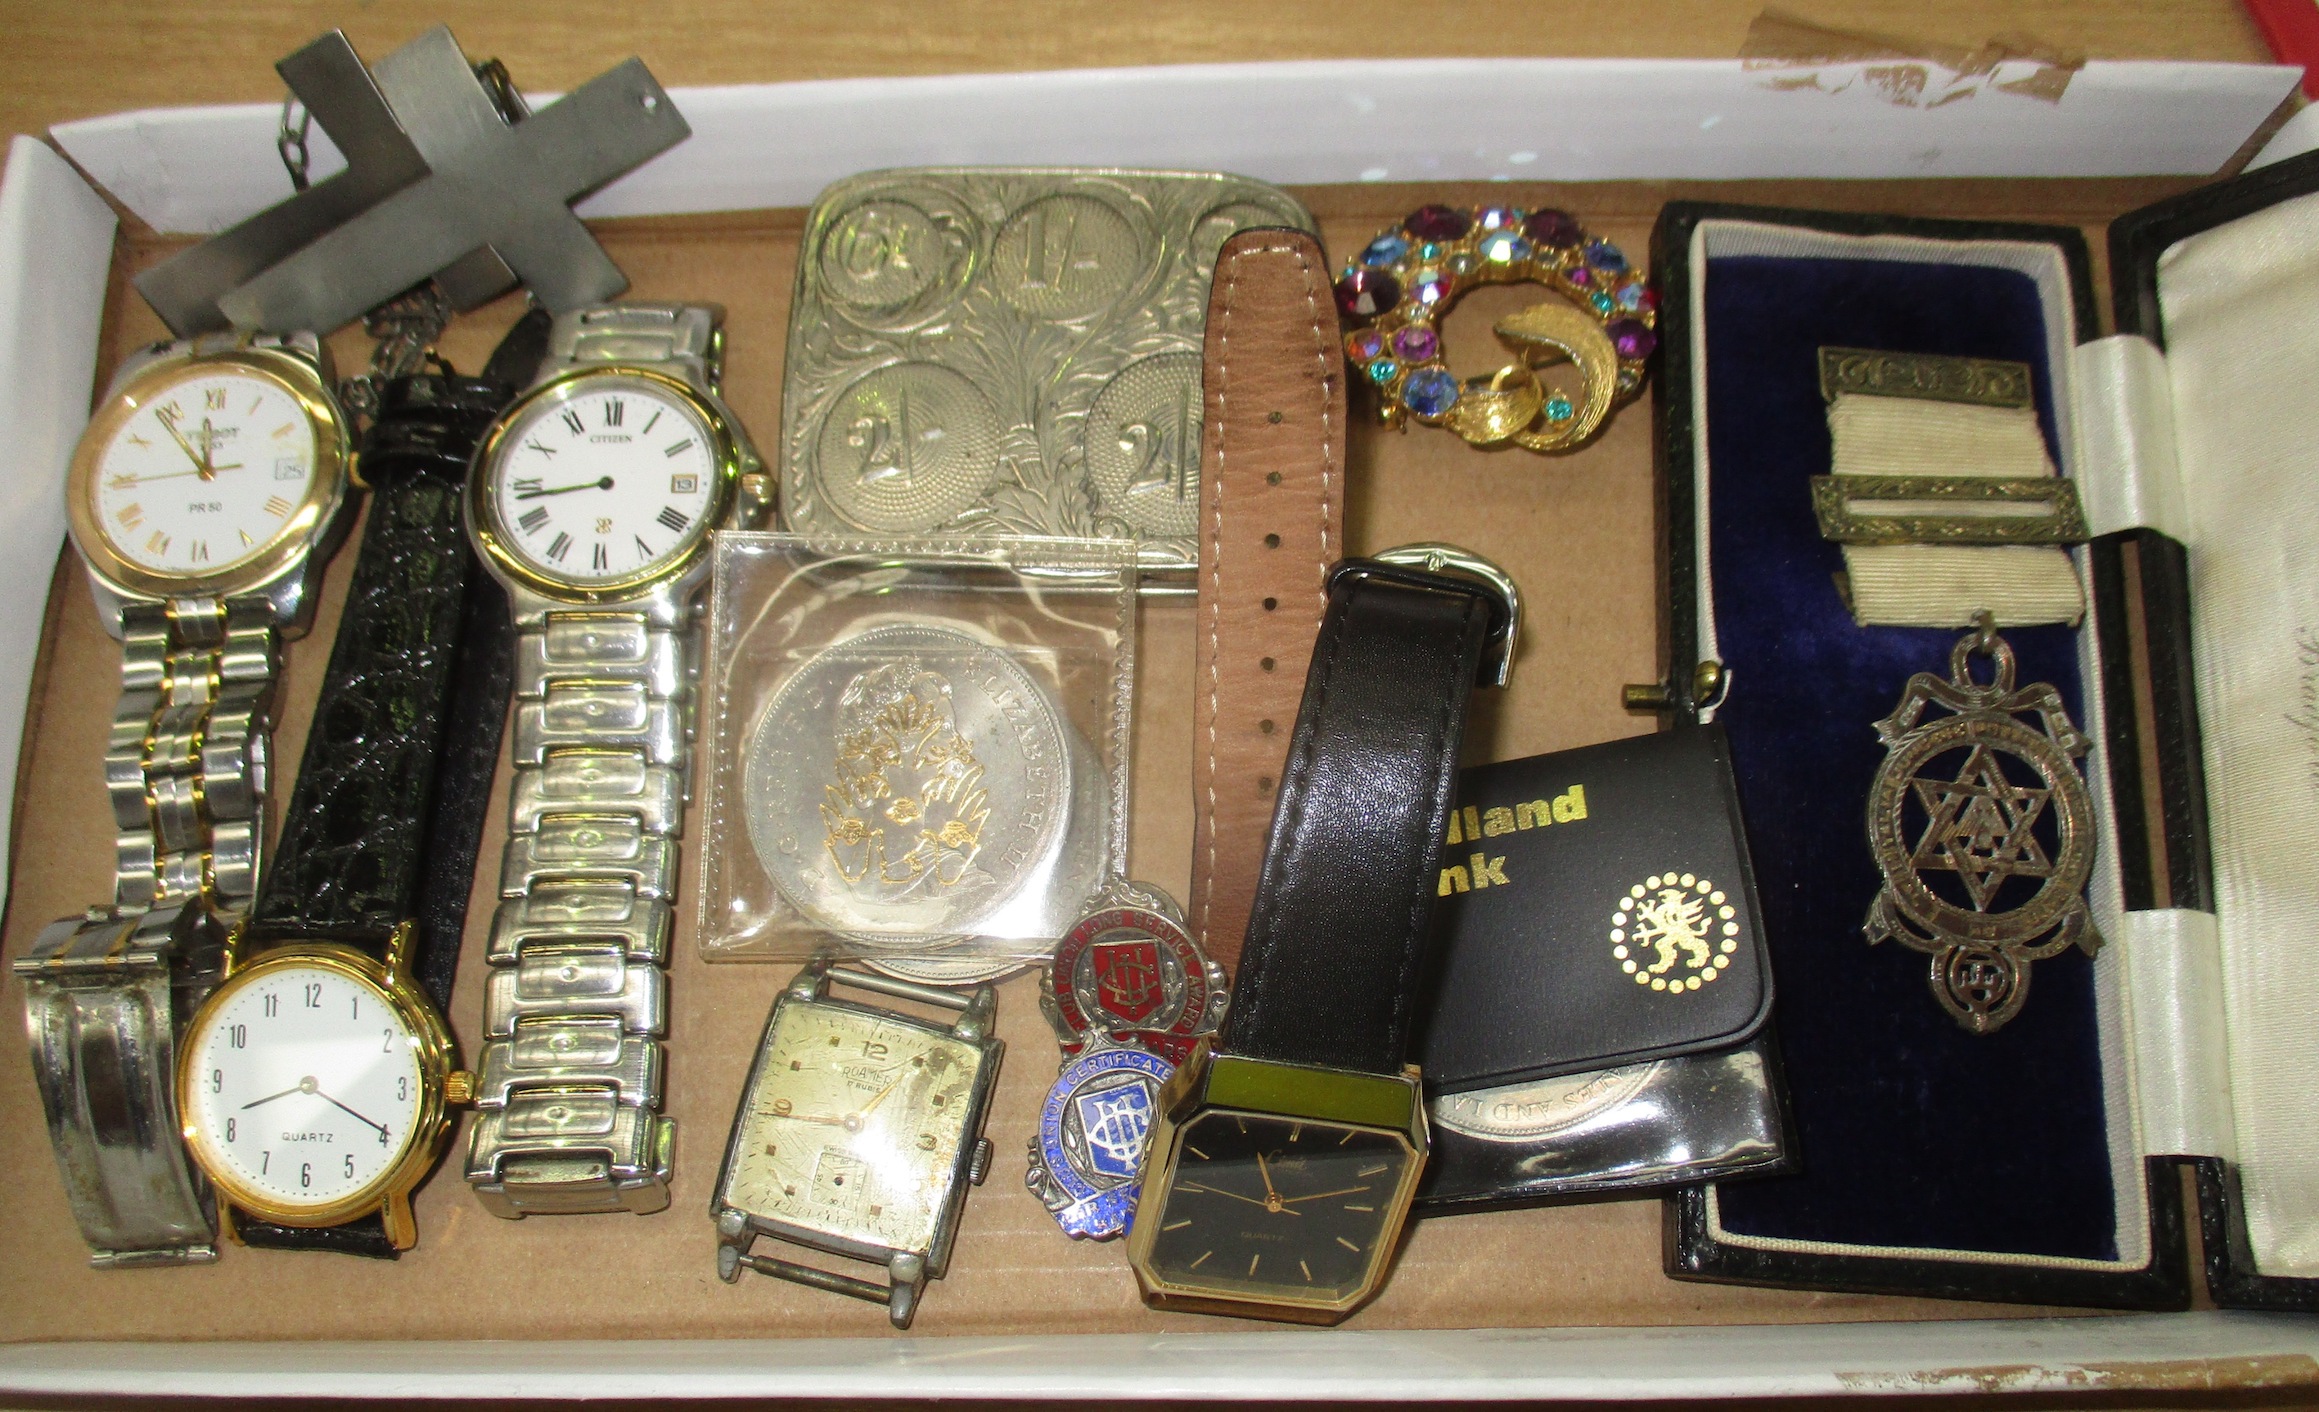 Contents to box - Citizen, Tissot and other dress watches,